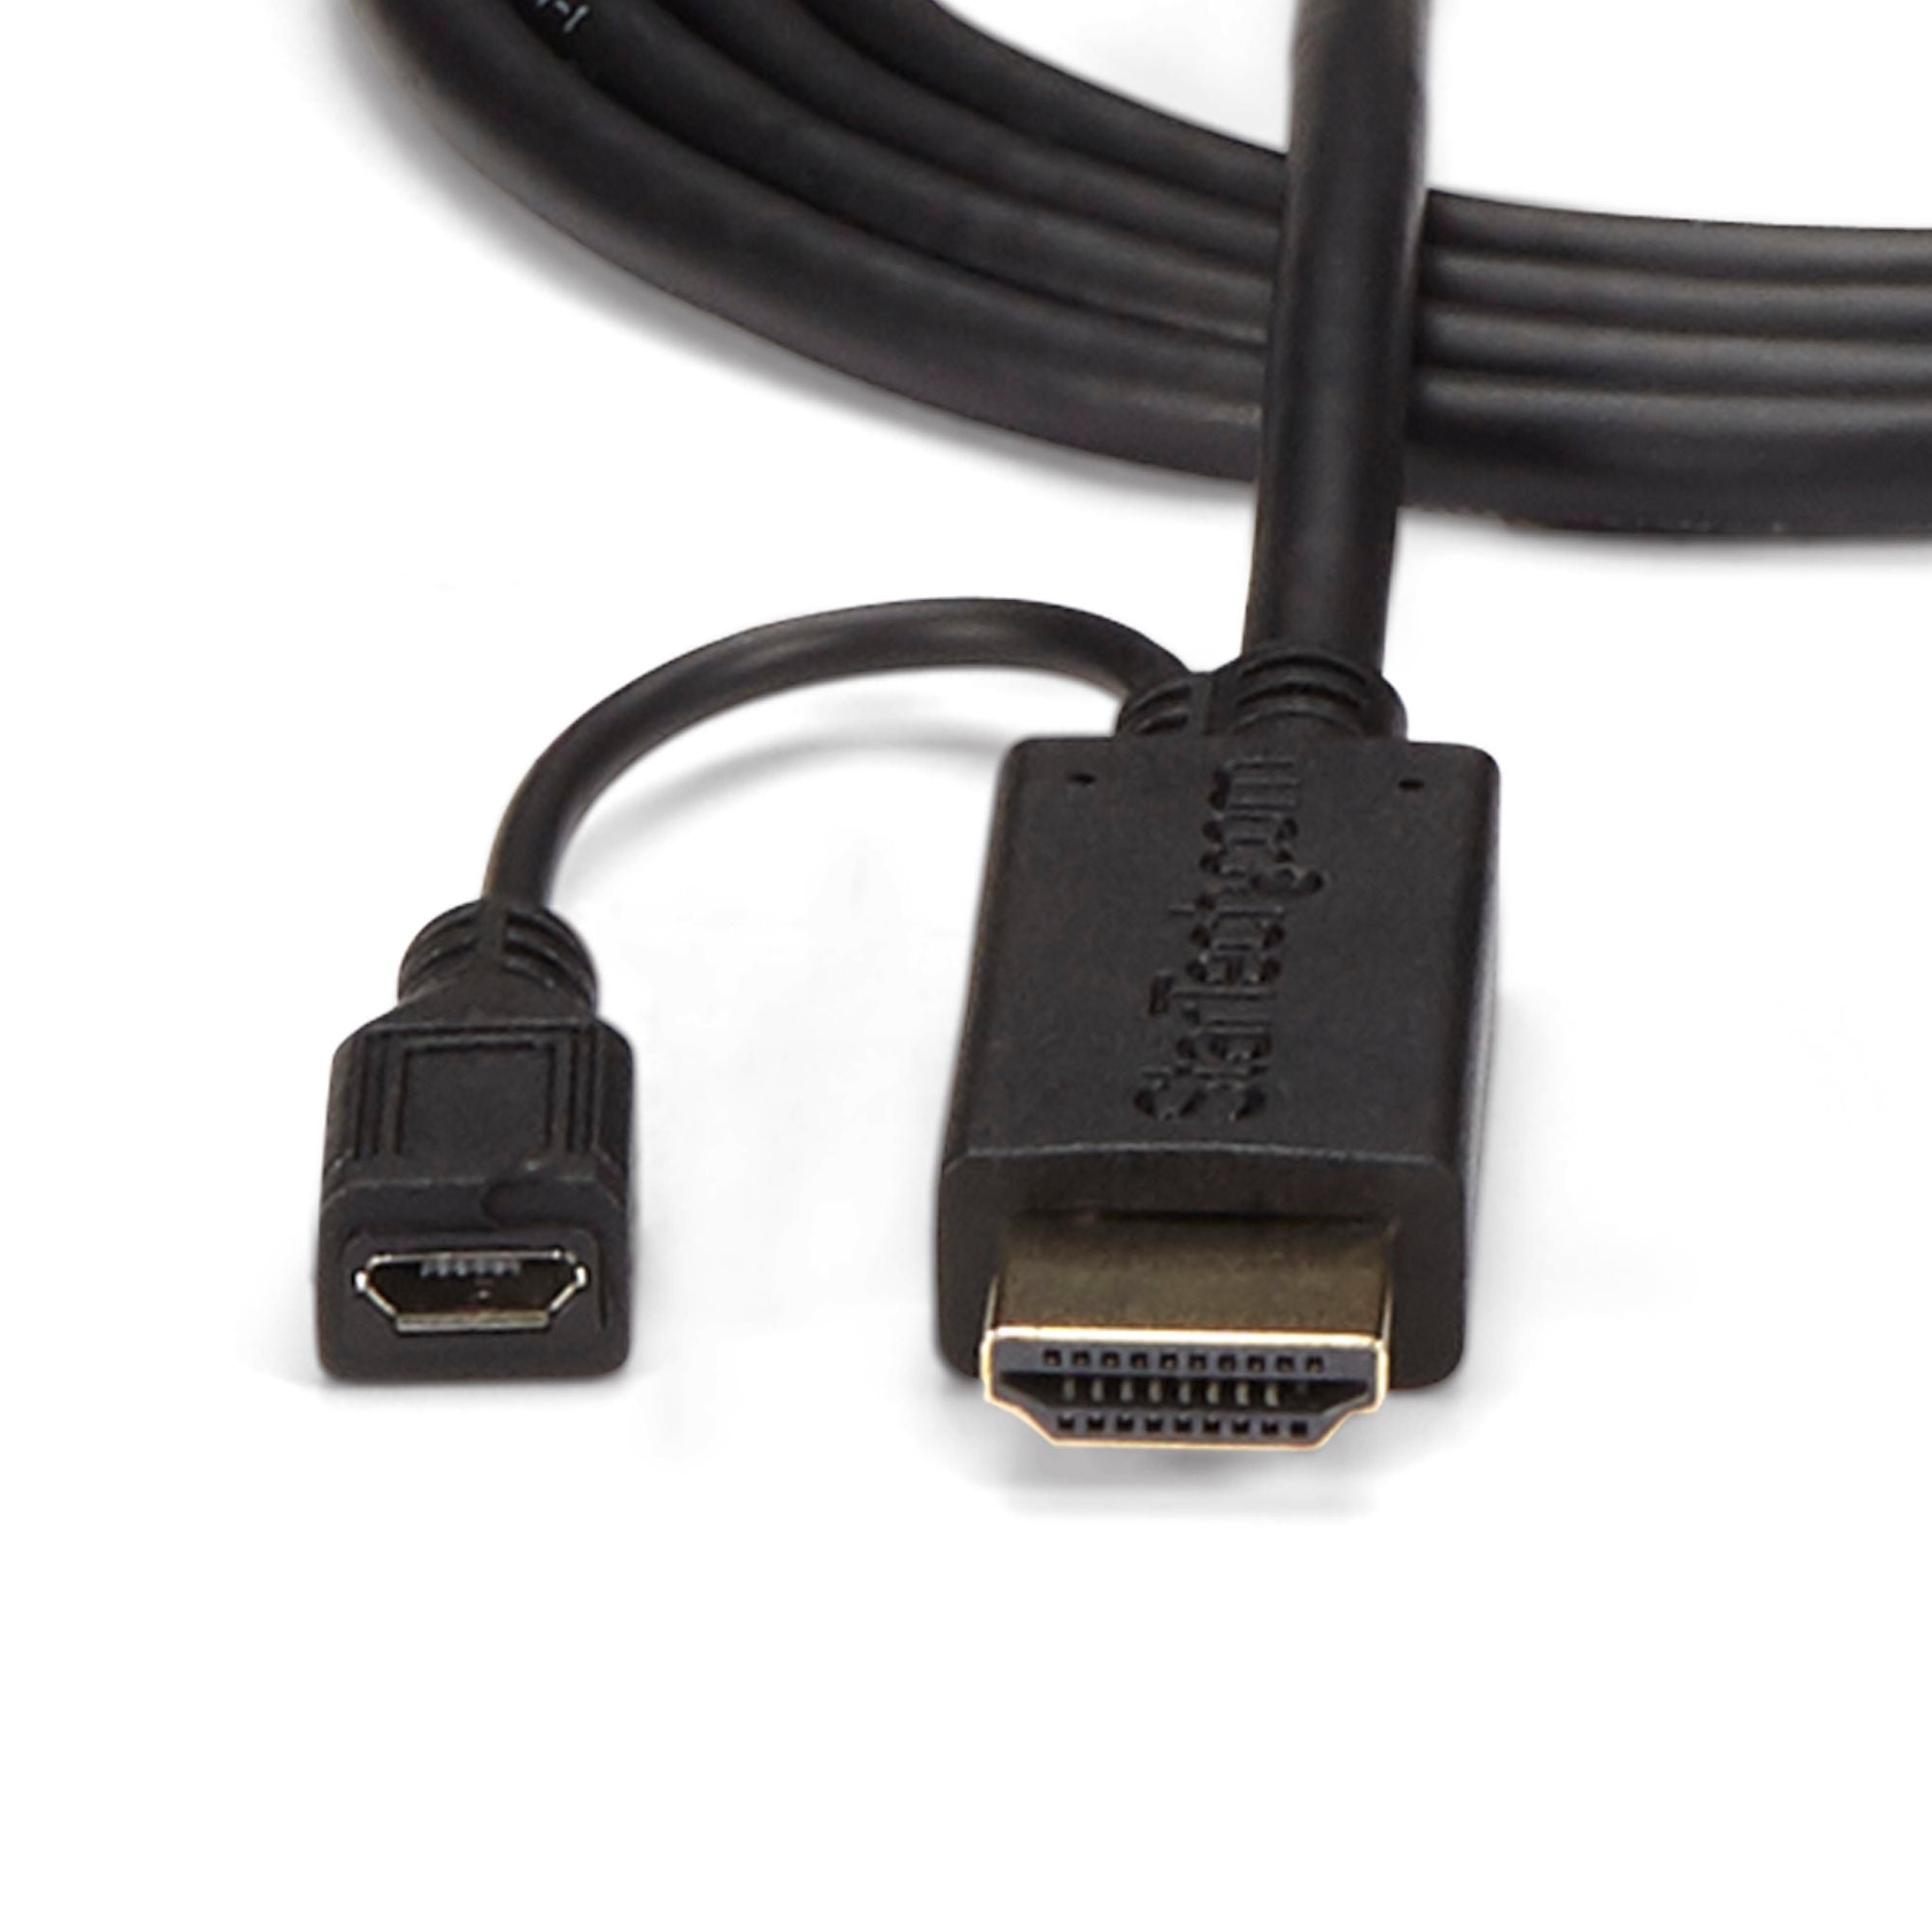 StarTech 6ft HDMI to VGA Active Conversion Adapter Cable ( HD2VGAMM6 ) NEW